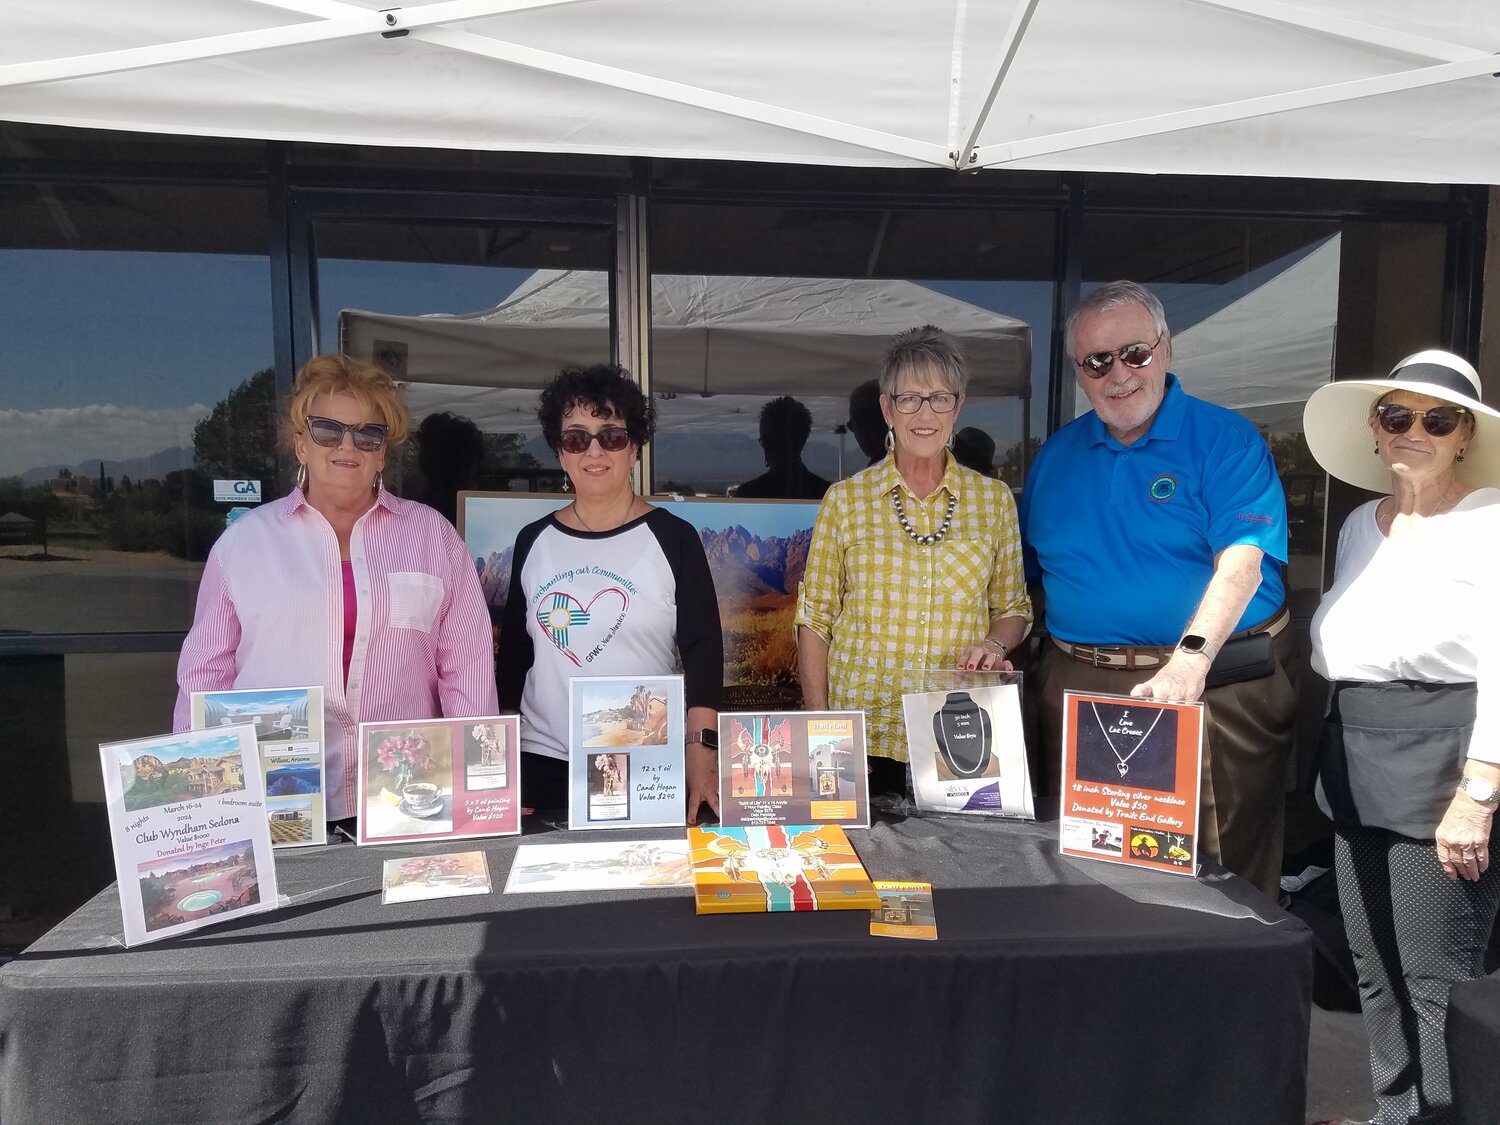 Left to right are Progress Club of Las Cruces members Laura Crews-Carreon, Chayo Garcia (president-elect), Mary Wilke, Ron Cavill and Debbie Bailey.